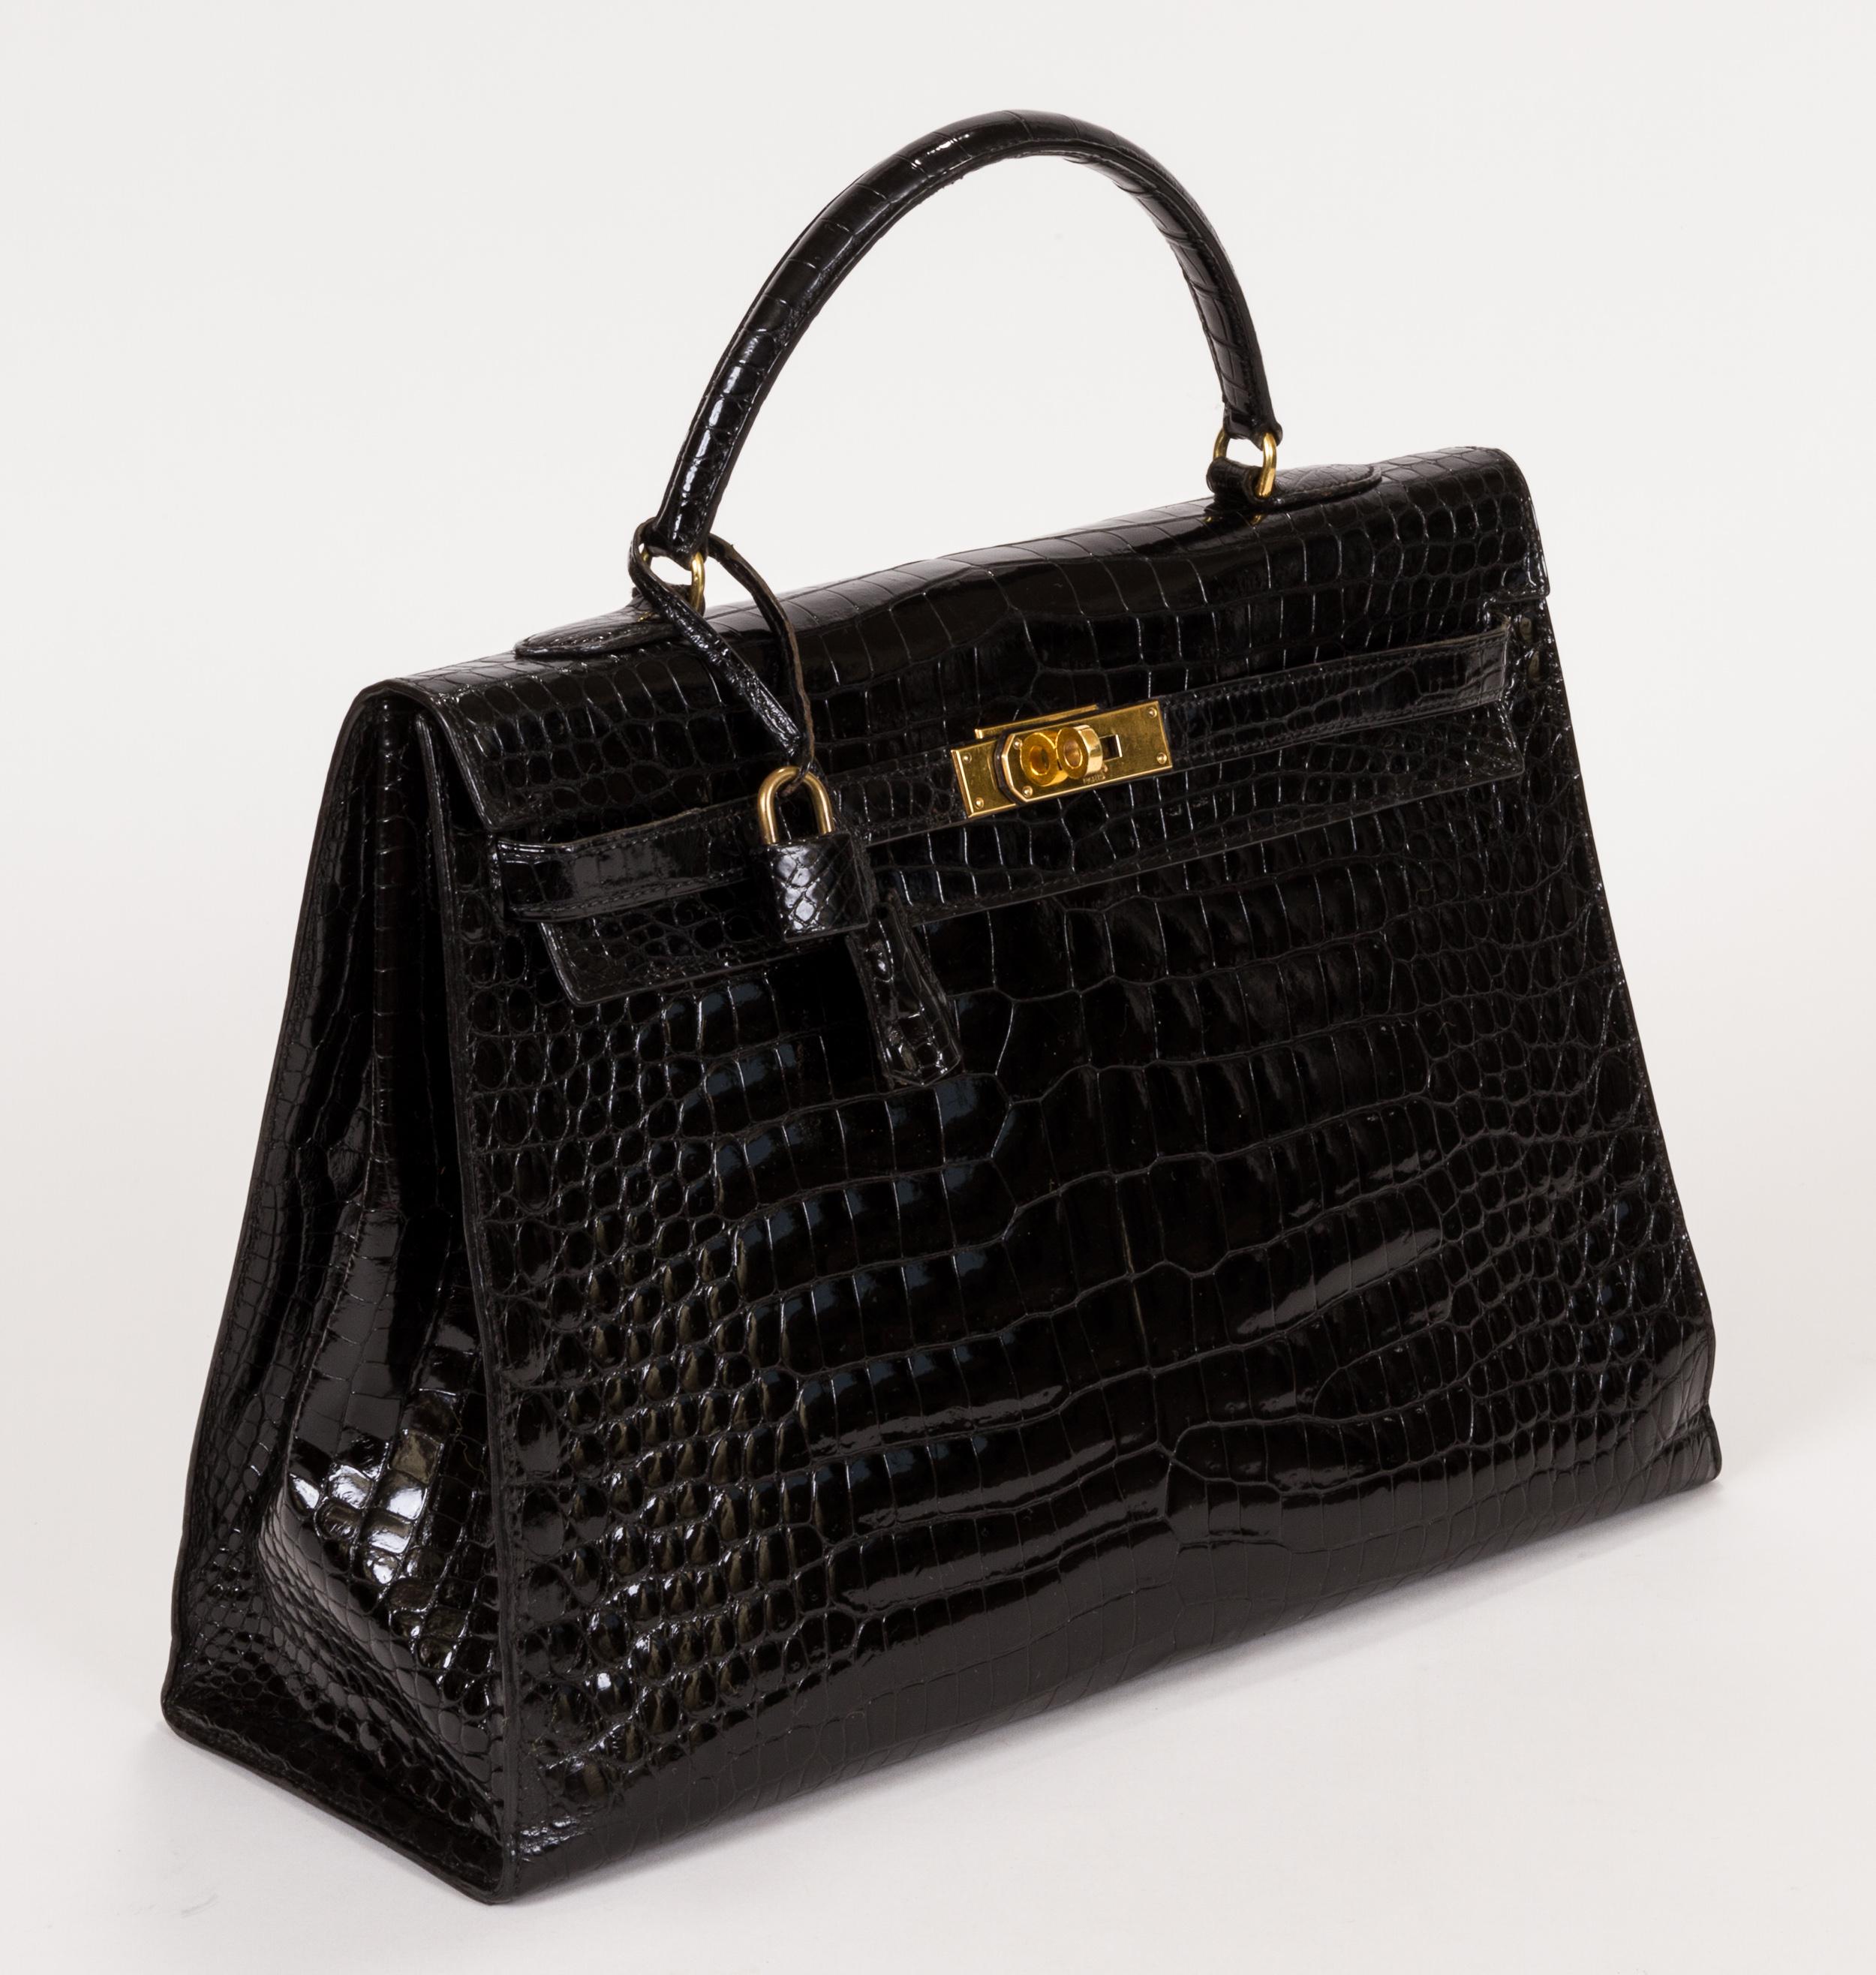 Hermès signature Kelly bag, 35 cm, in black shiny crocodile leather and gold-plated hardware. Blind stamped 